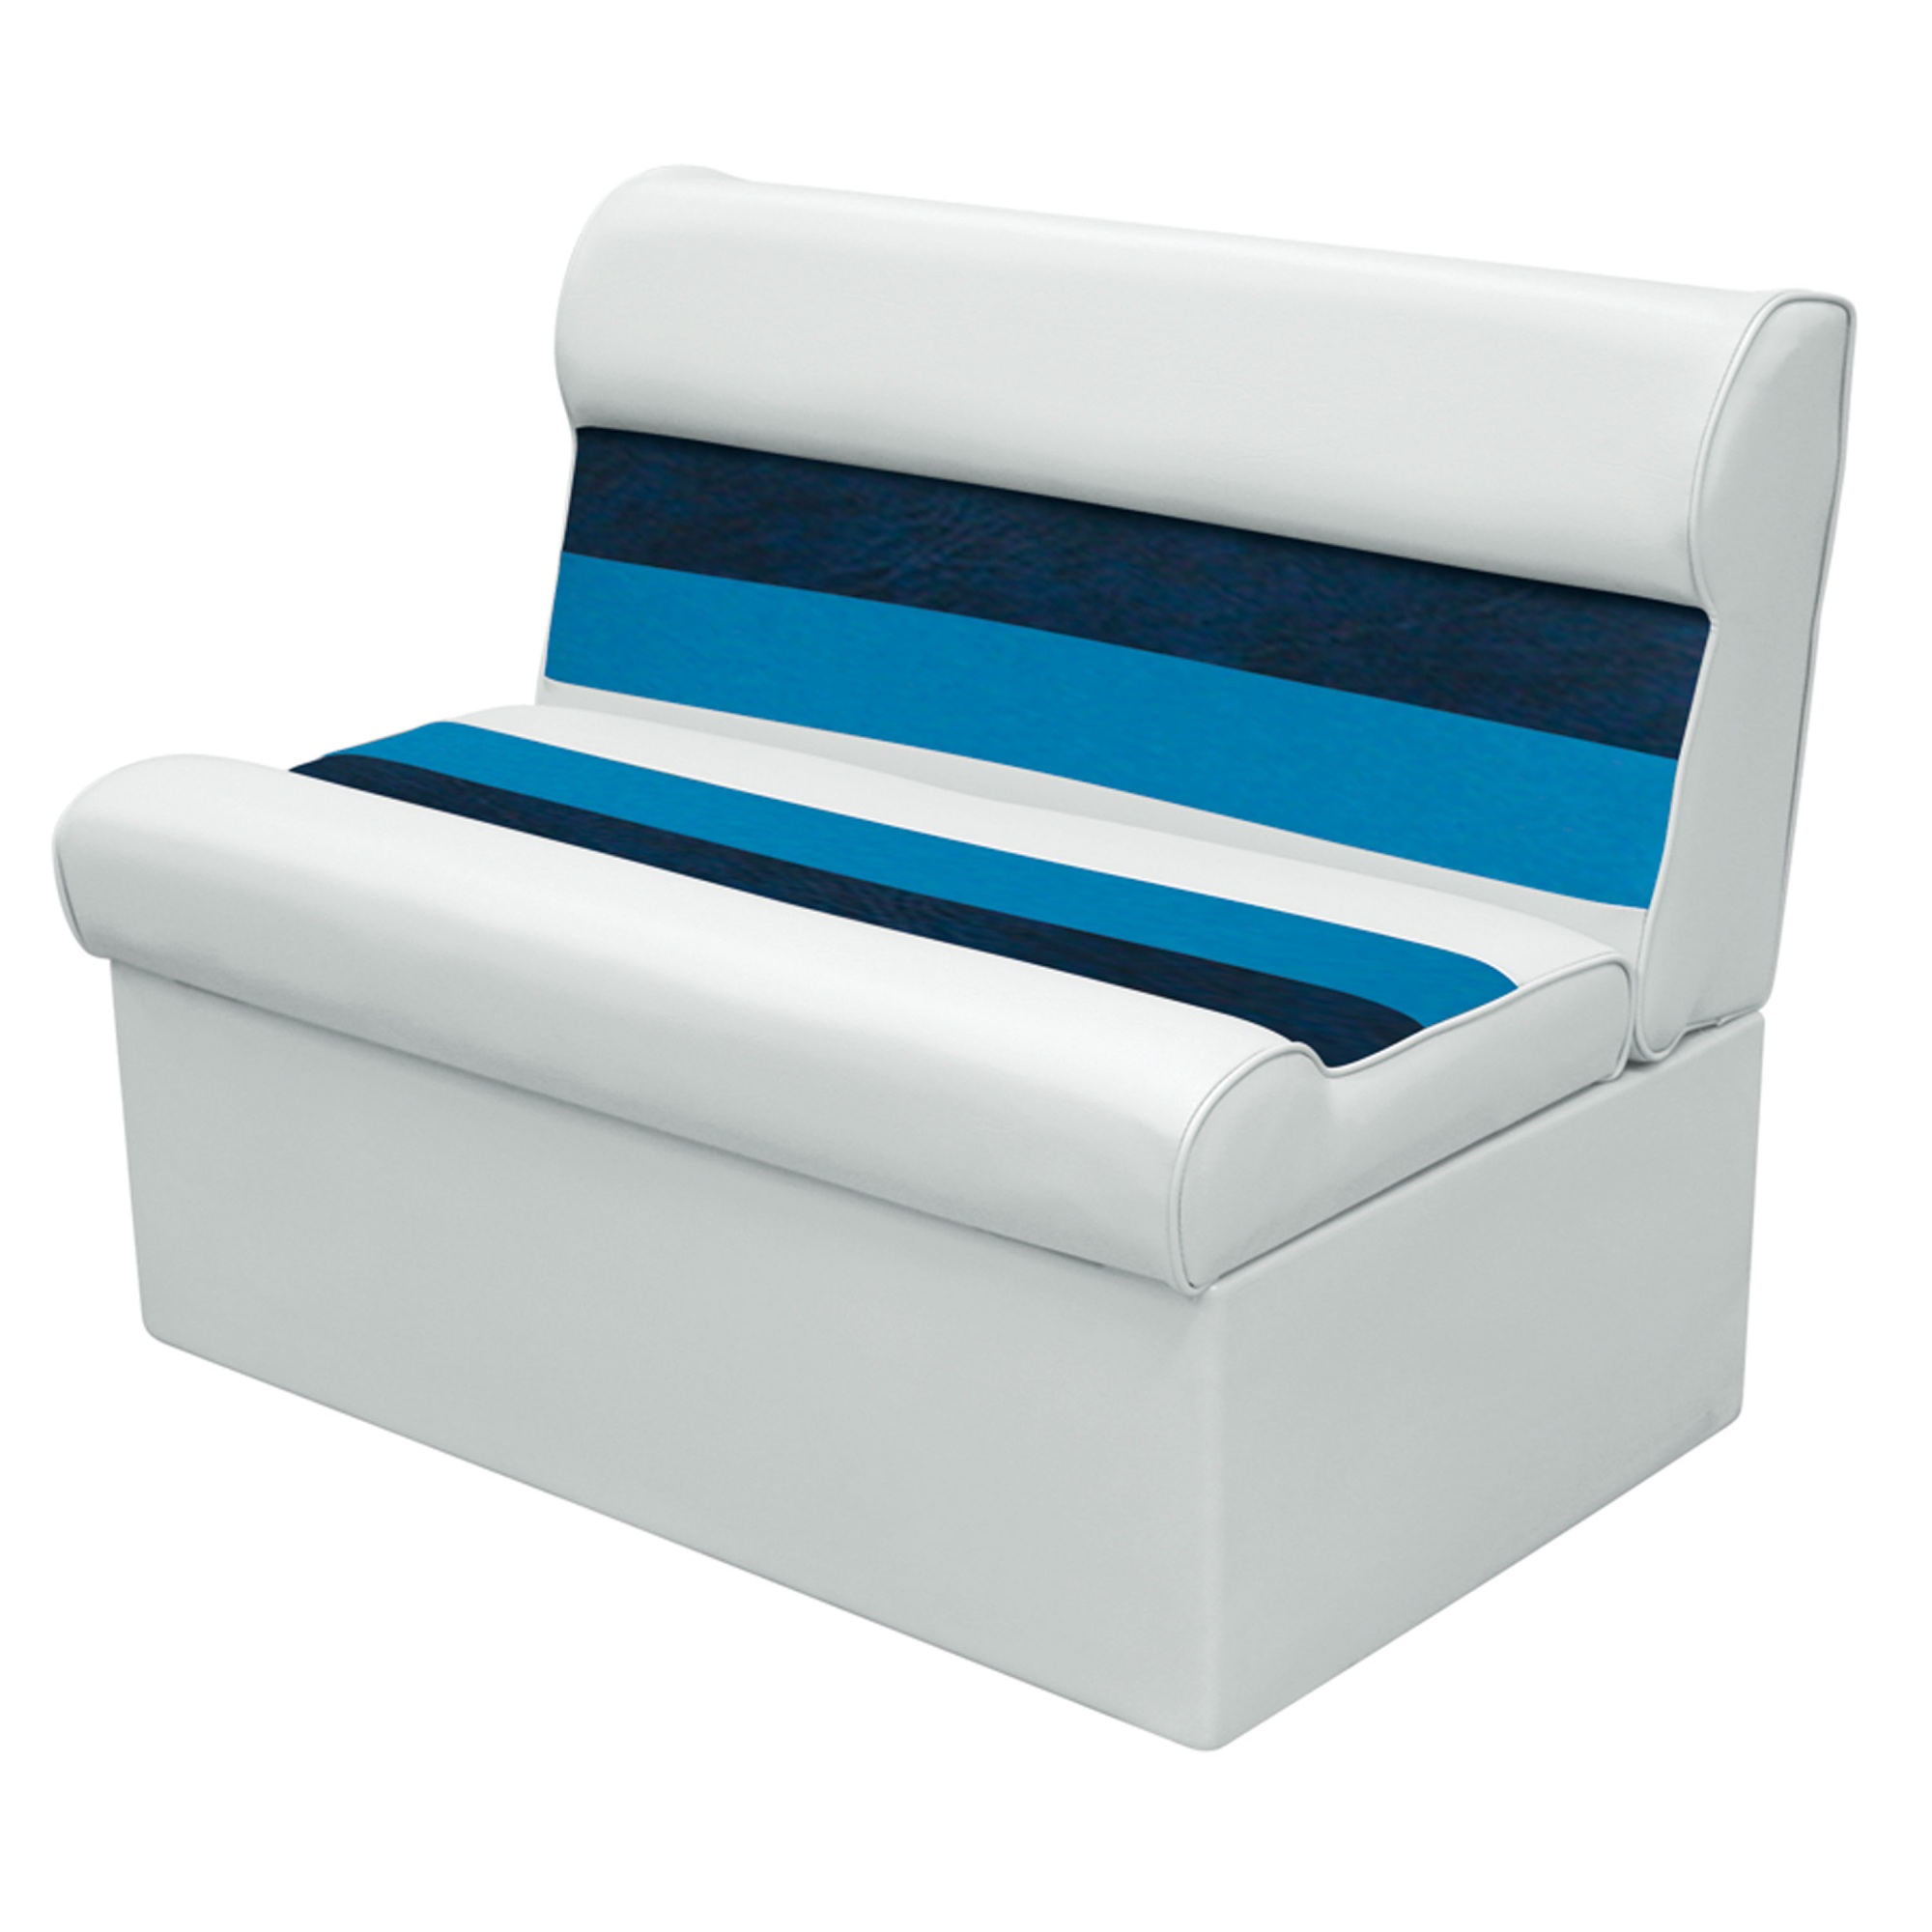 Wise 8WD100-1008 Deluxe Pontoon Bench and Base - White/Navy/Blue